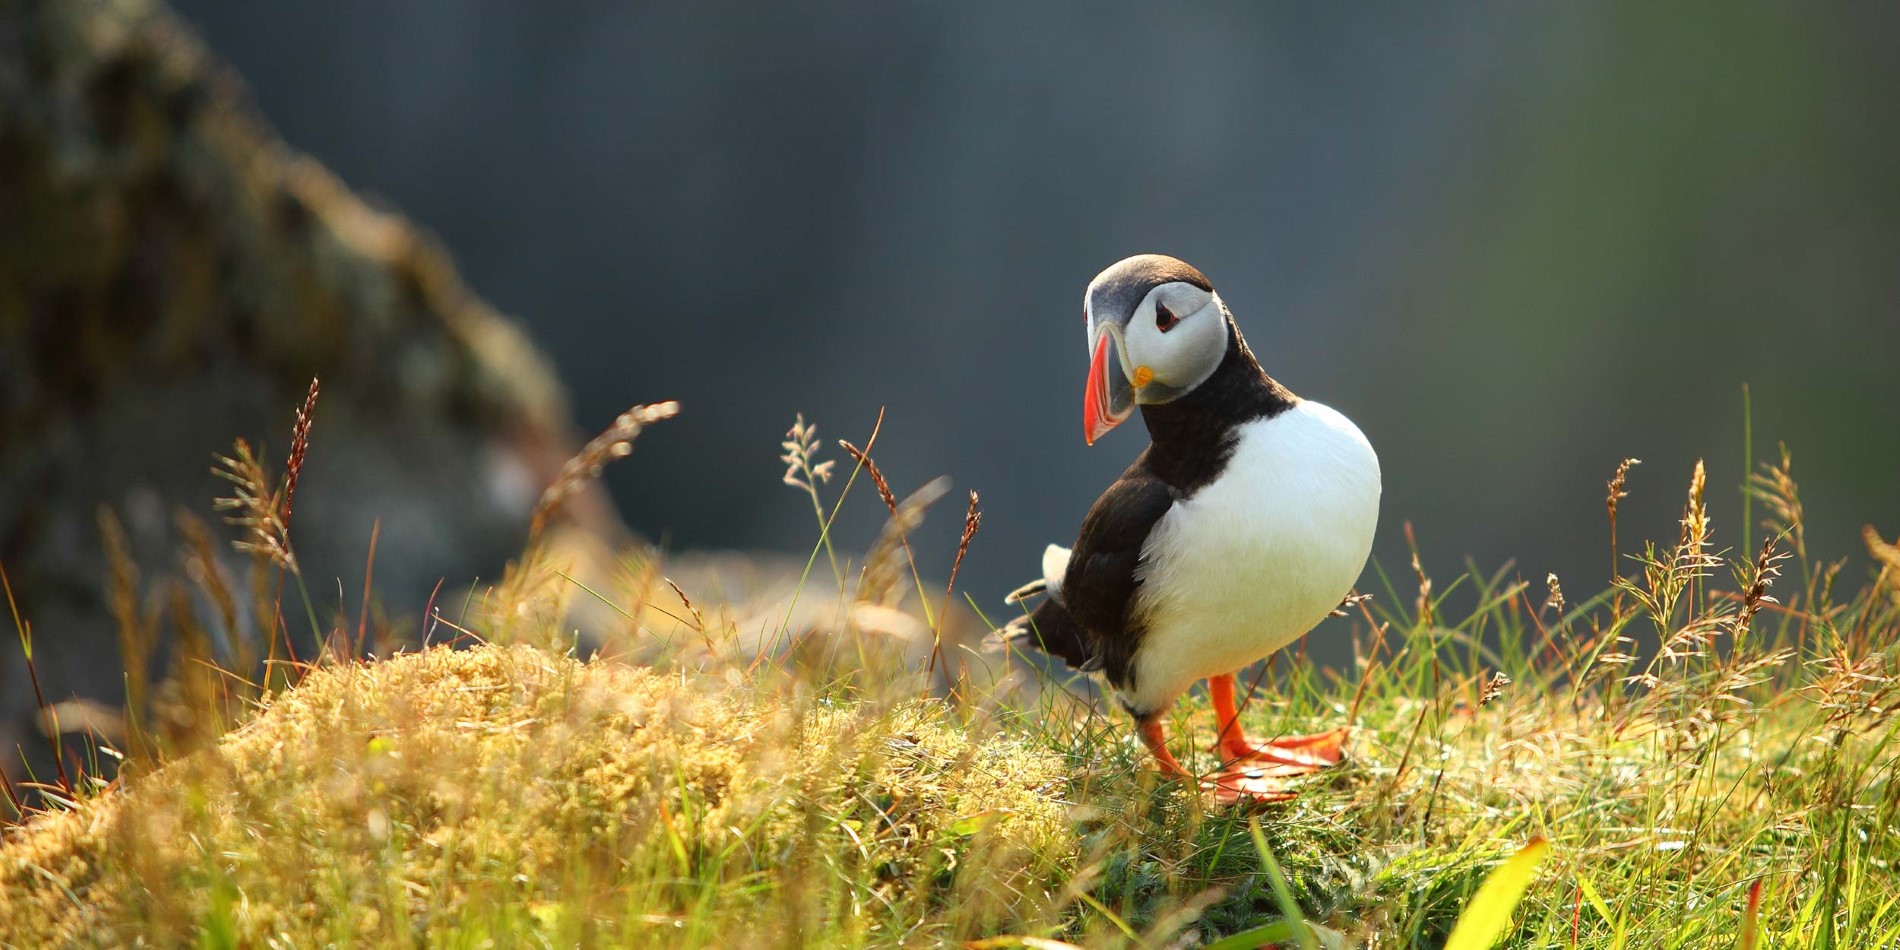 Close up of a Puffin on a grassy slope